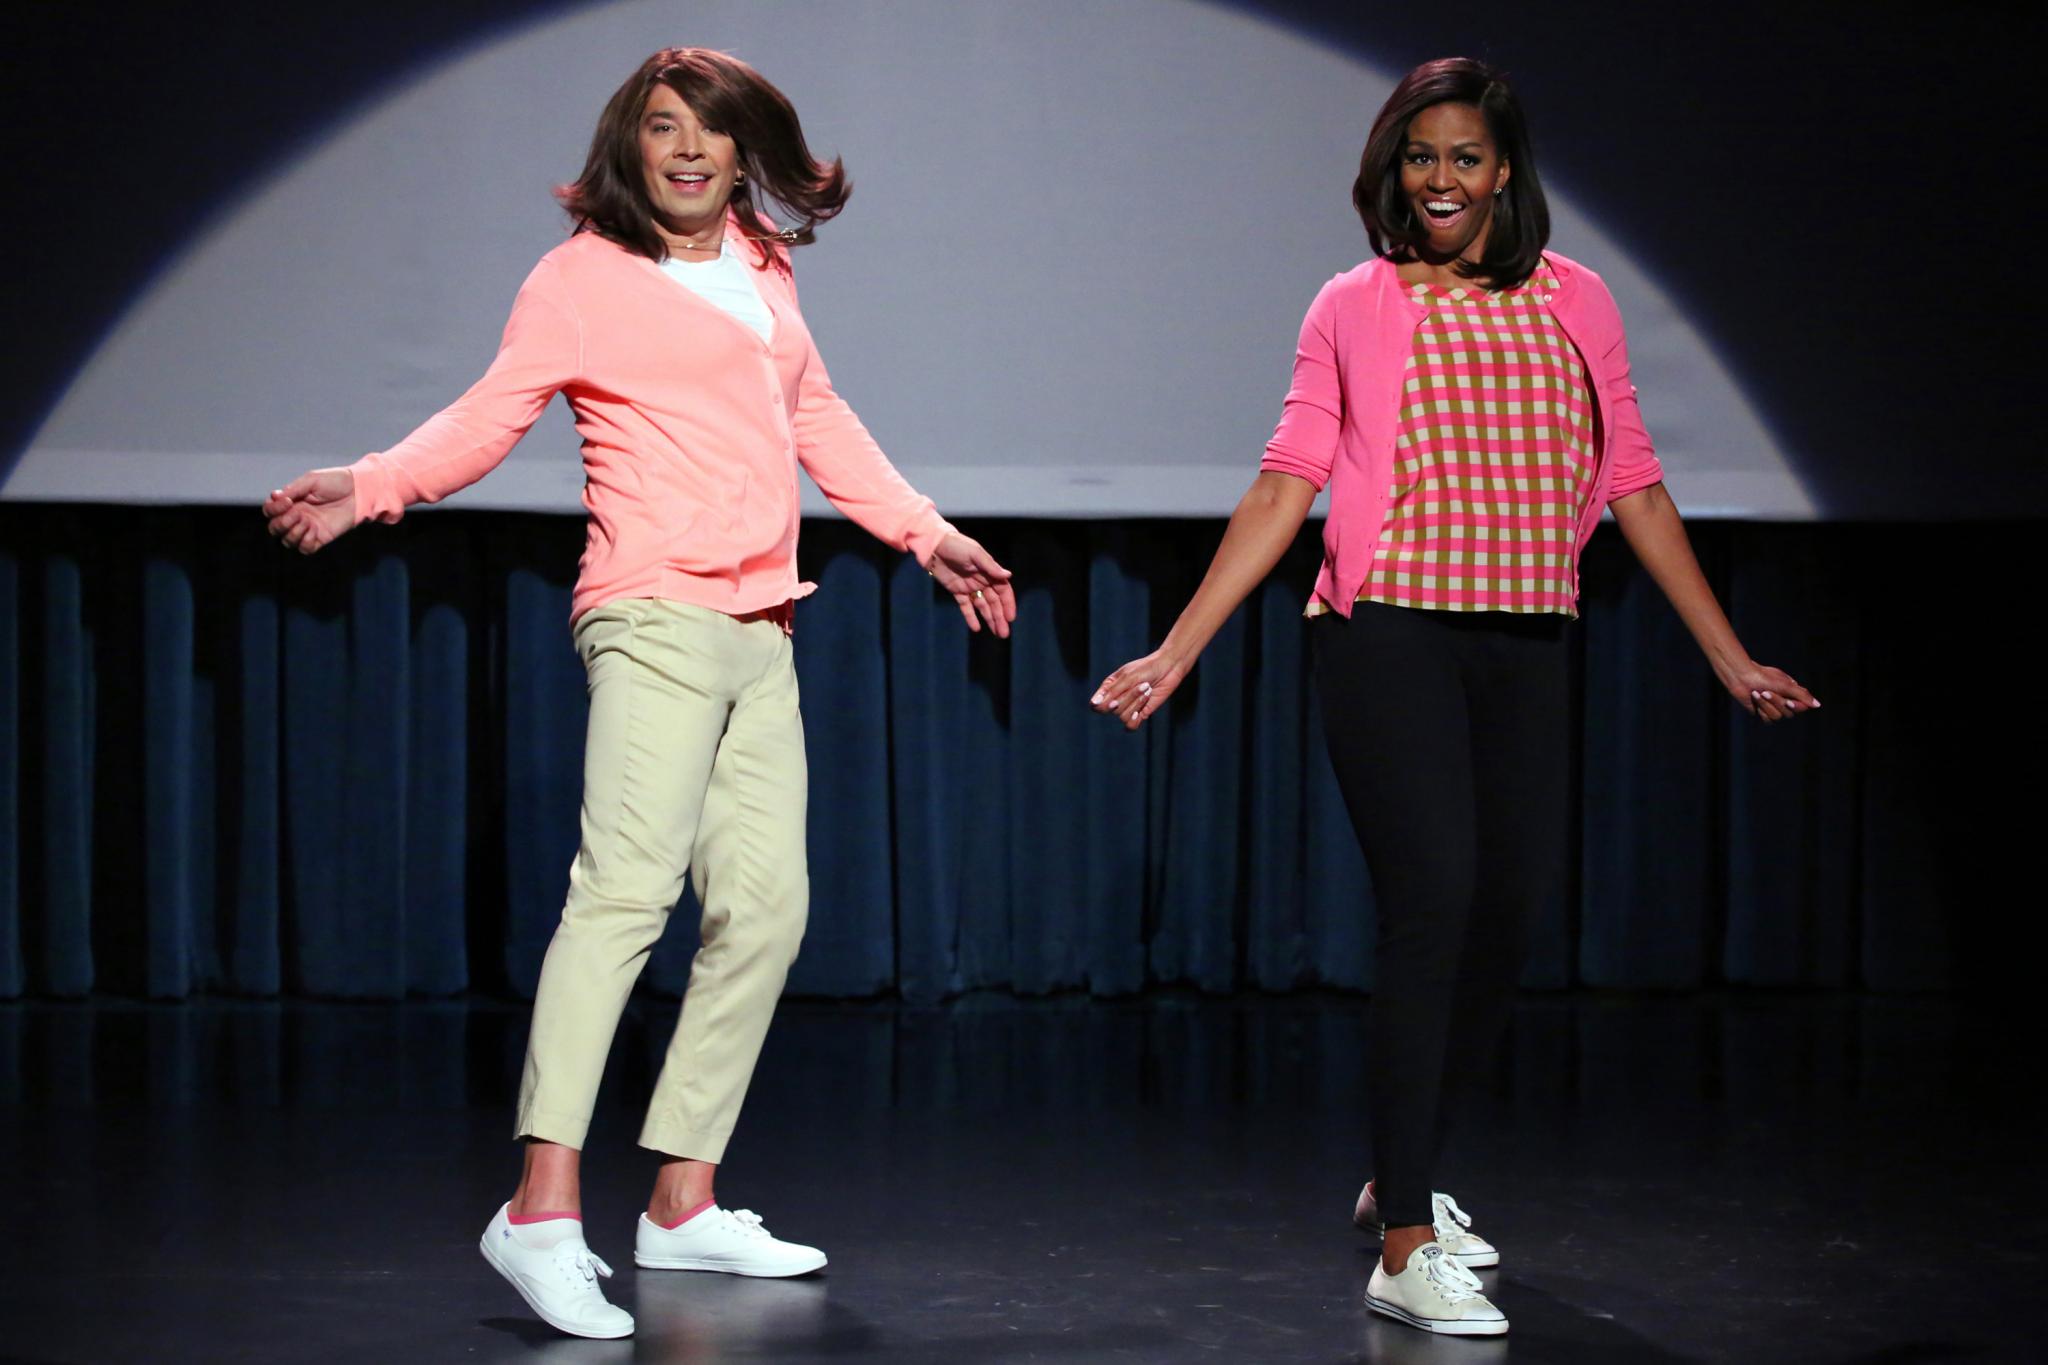 Michelle Obama's 10 Most Aww-Worthy Moments
